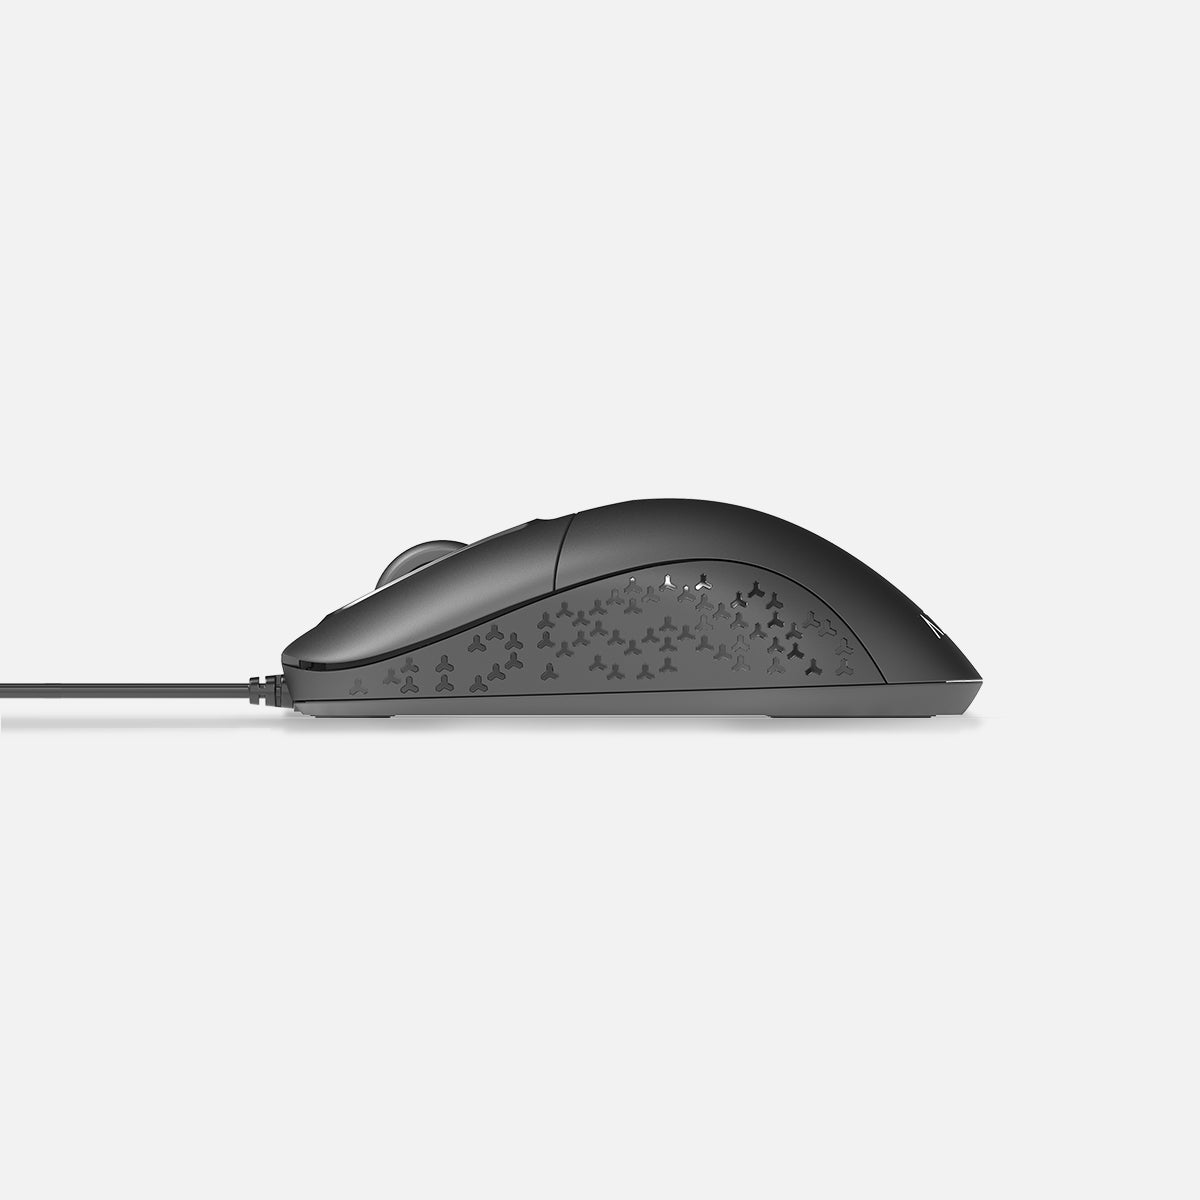 MS530 Antimicrobial Optical Mouse